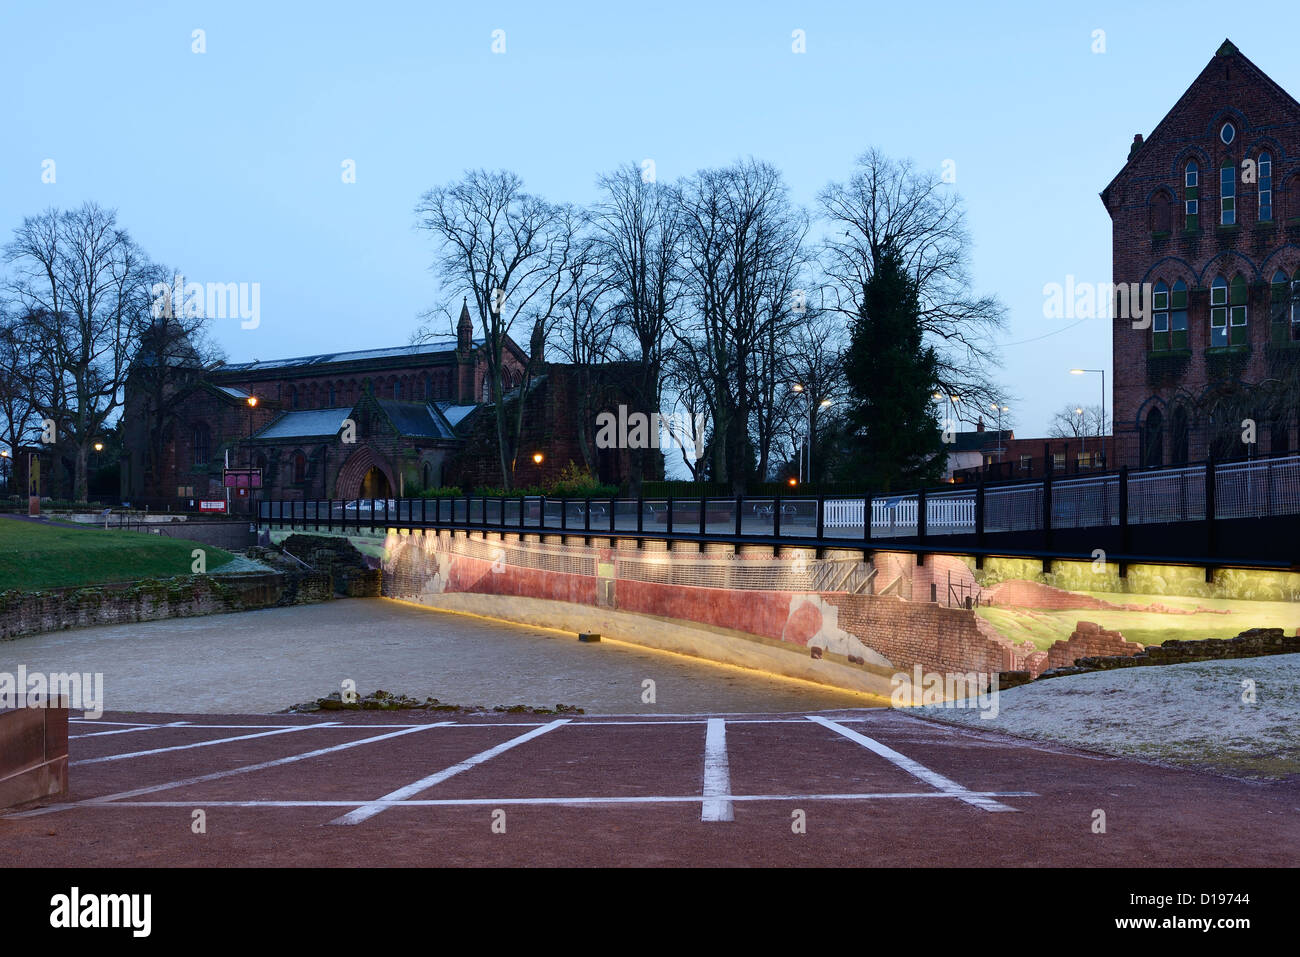 The Roman Amphitheatre in Chester with a mural showing the other half that has not yet been excavated. Stock Photo